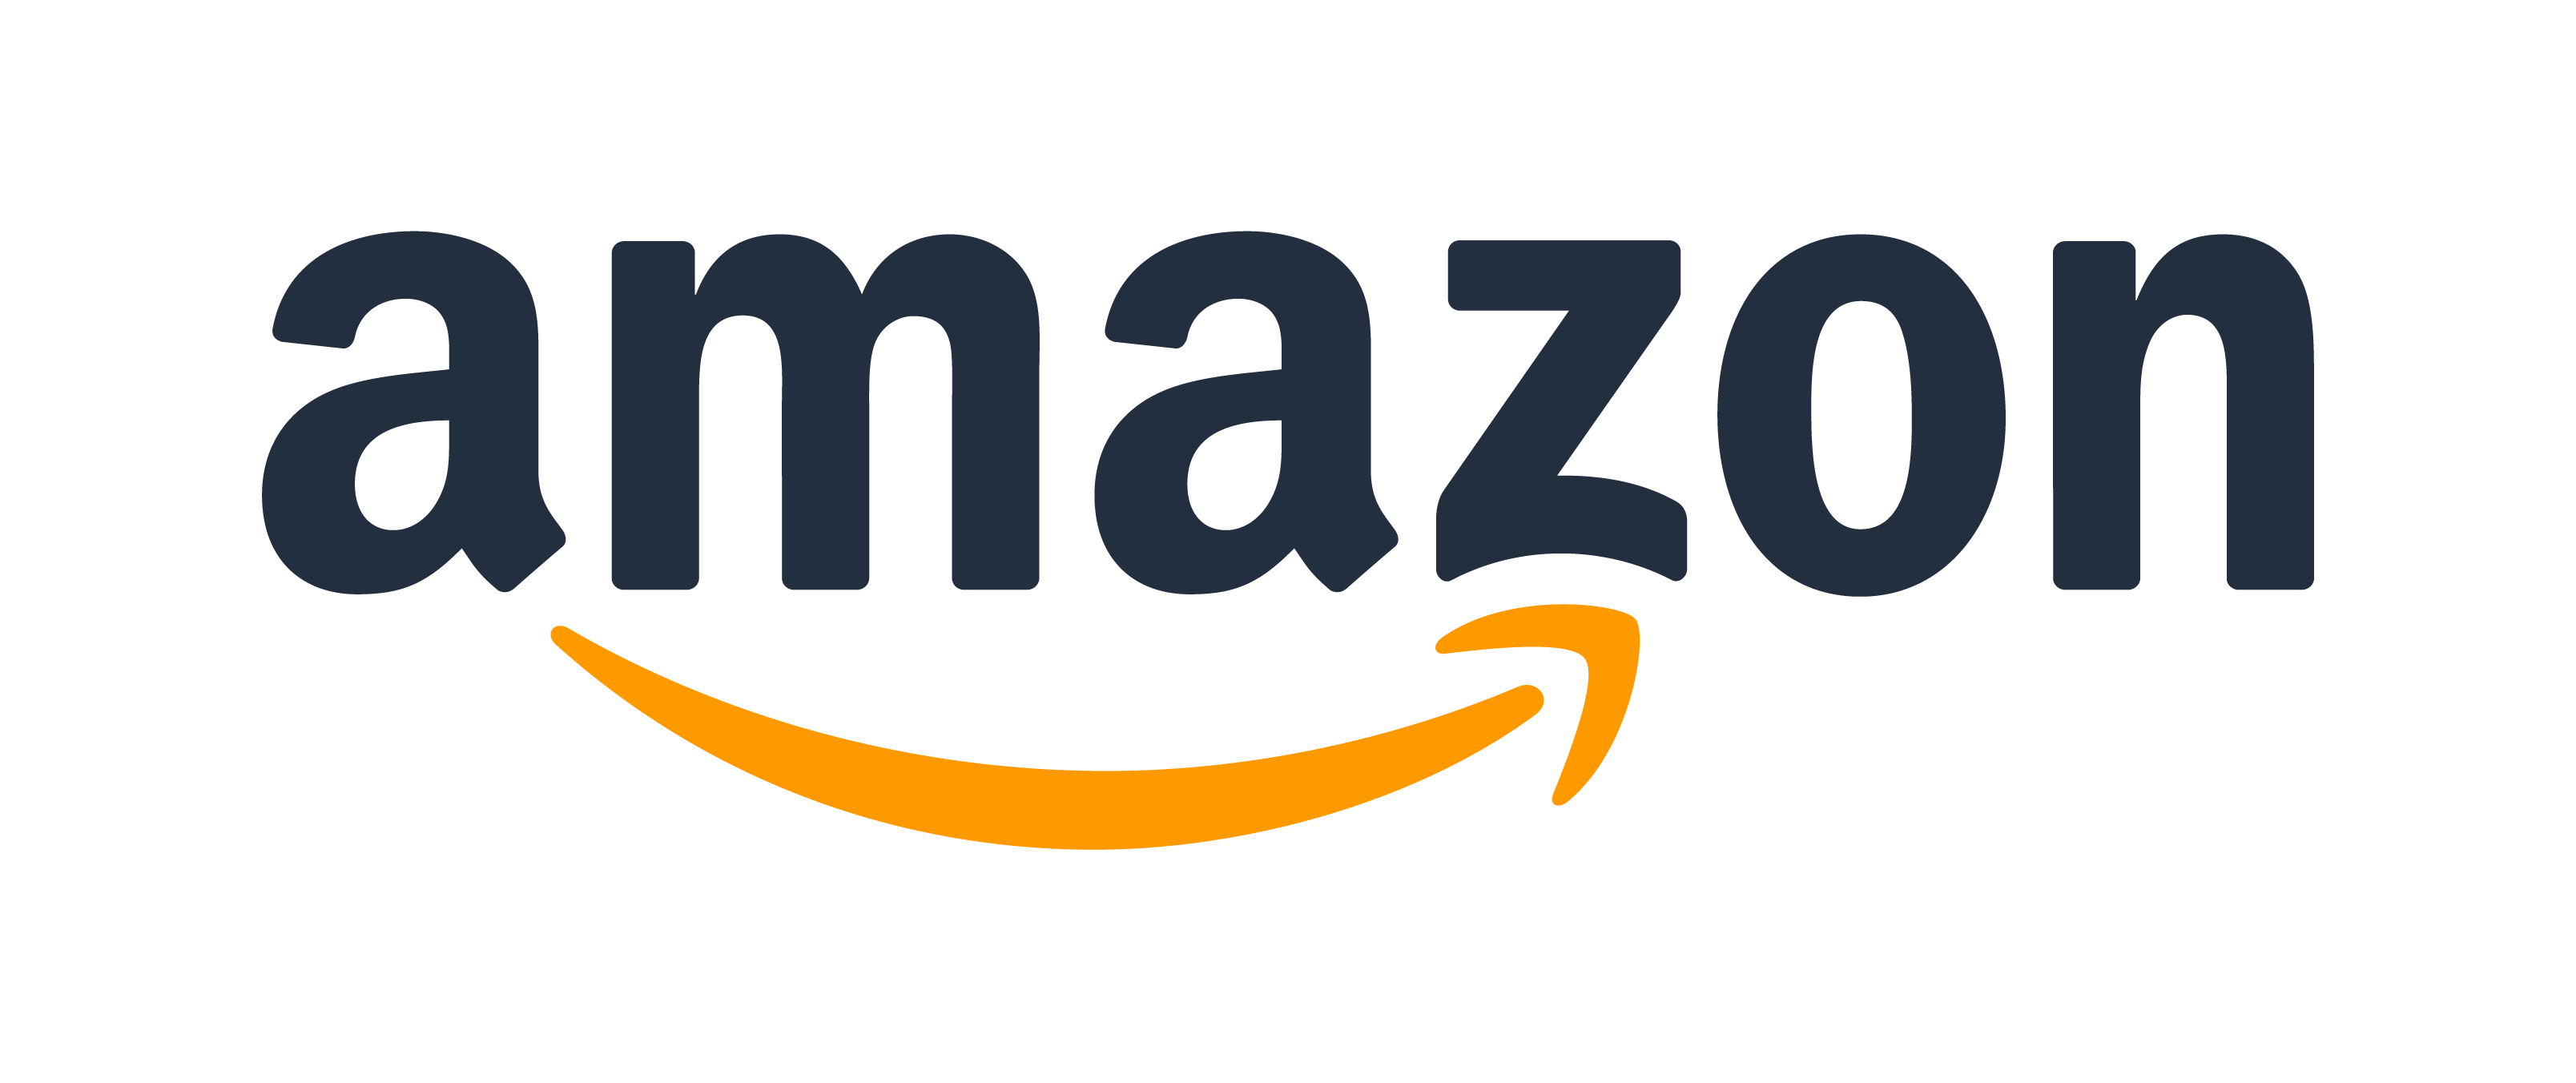 Images And Videos | Amazon Pluspng.com, Inc.   Press Room - Amazon, Transparent background PNG HD thumbnail